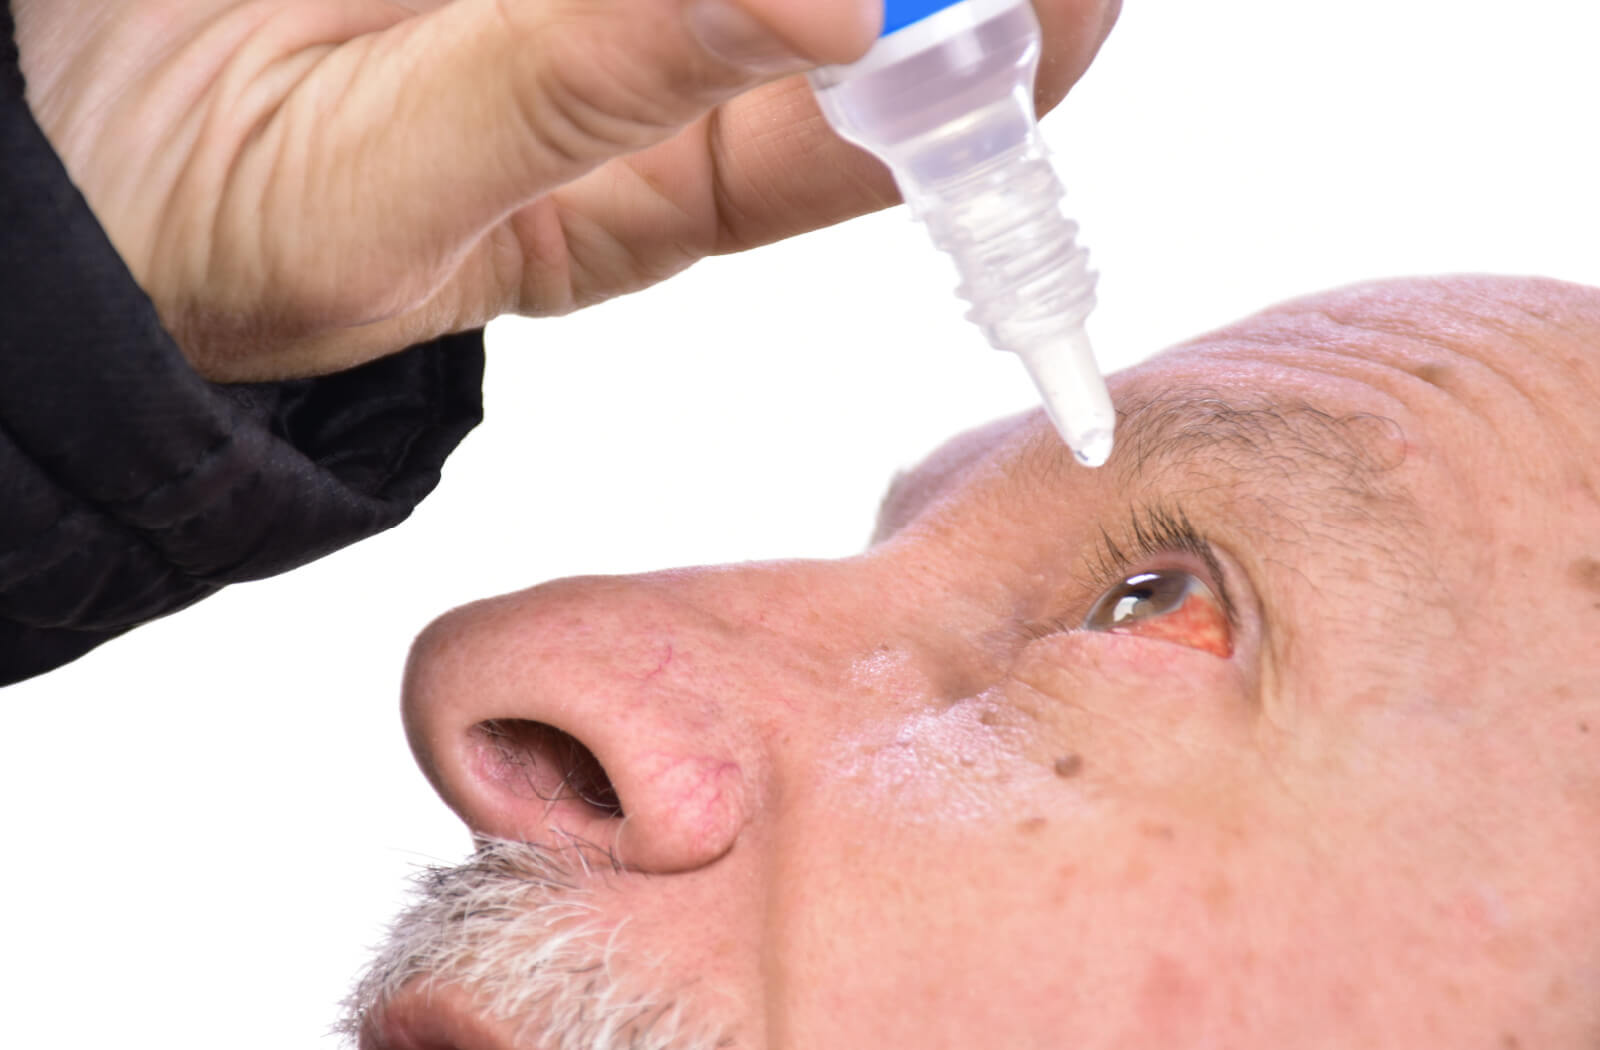 An elderly man is using eye drops to treat his dry eye. IPL is an effective therapy for relieving dry eye symptoms.